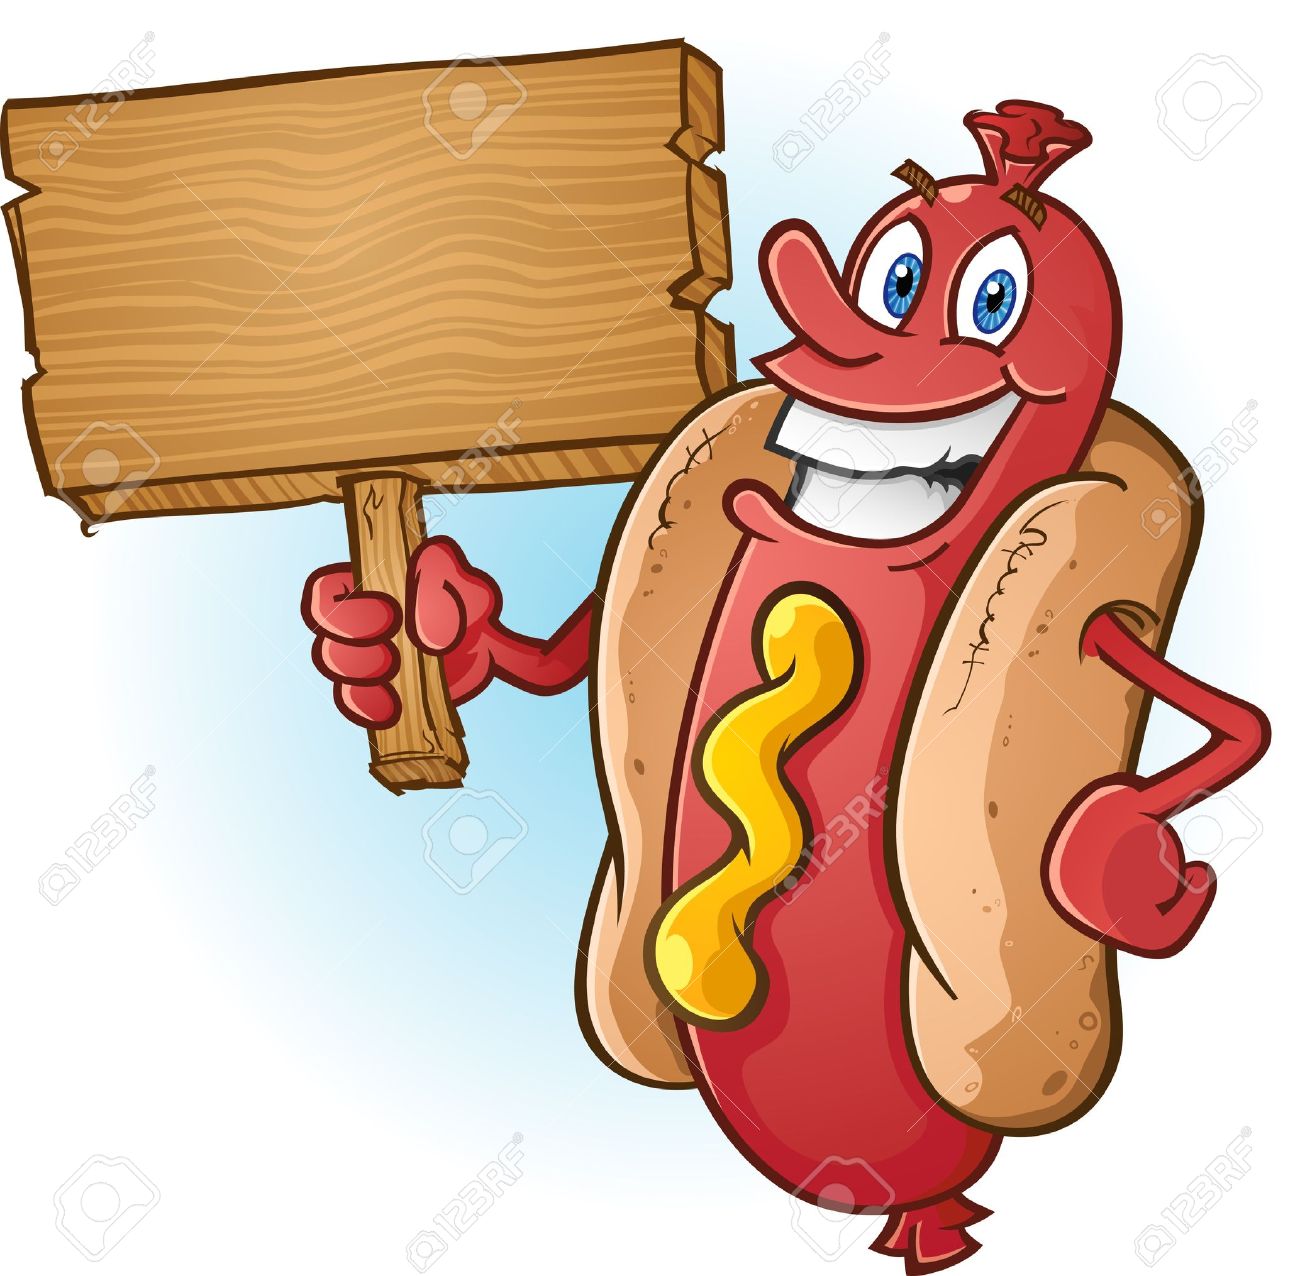 1532 Hot Dog free clipart.